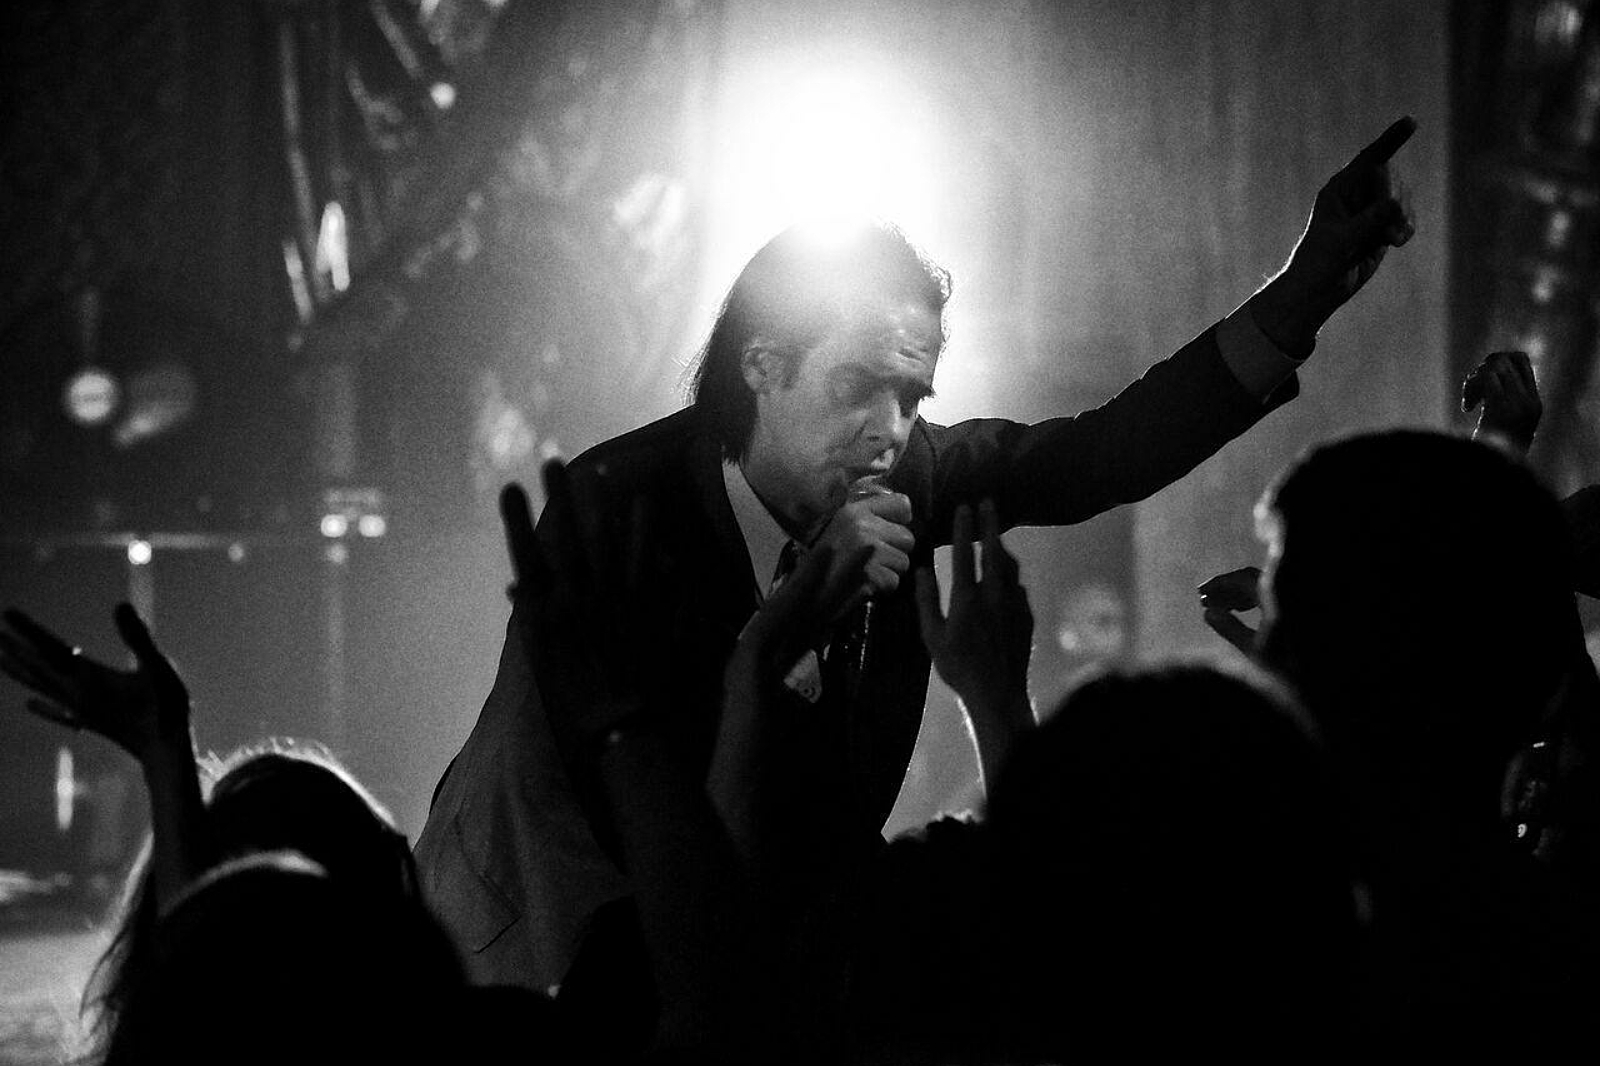 Nick Cave & The Bad Seeds to headline EXIT Festival